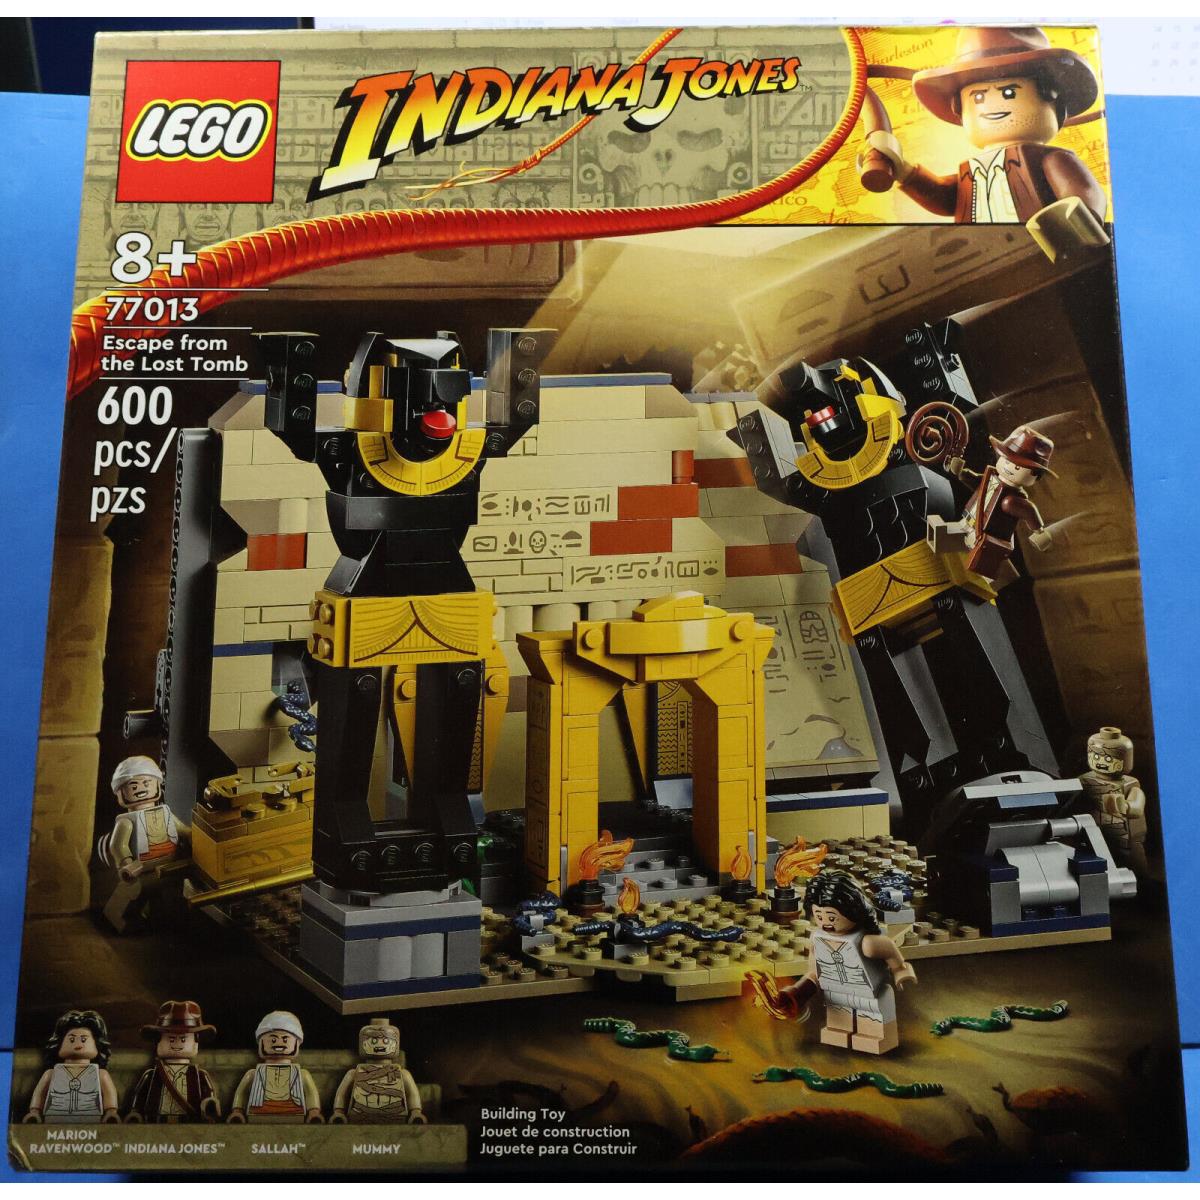 Lego 77013 Indiana Jones Escape From The Lost Tomb